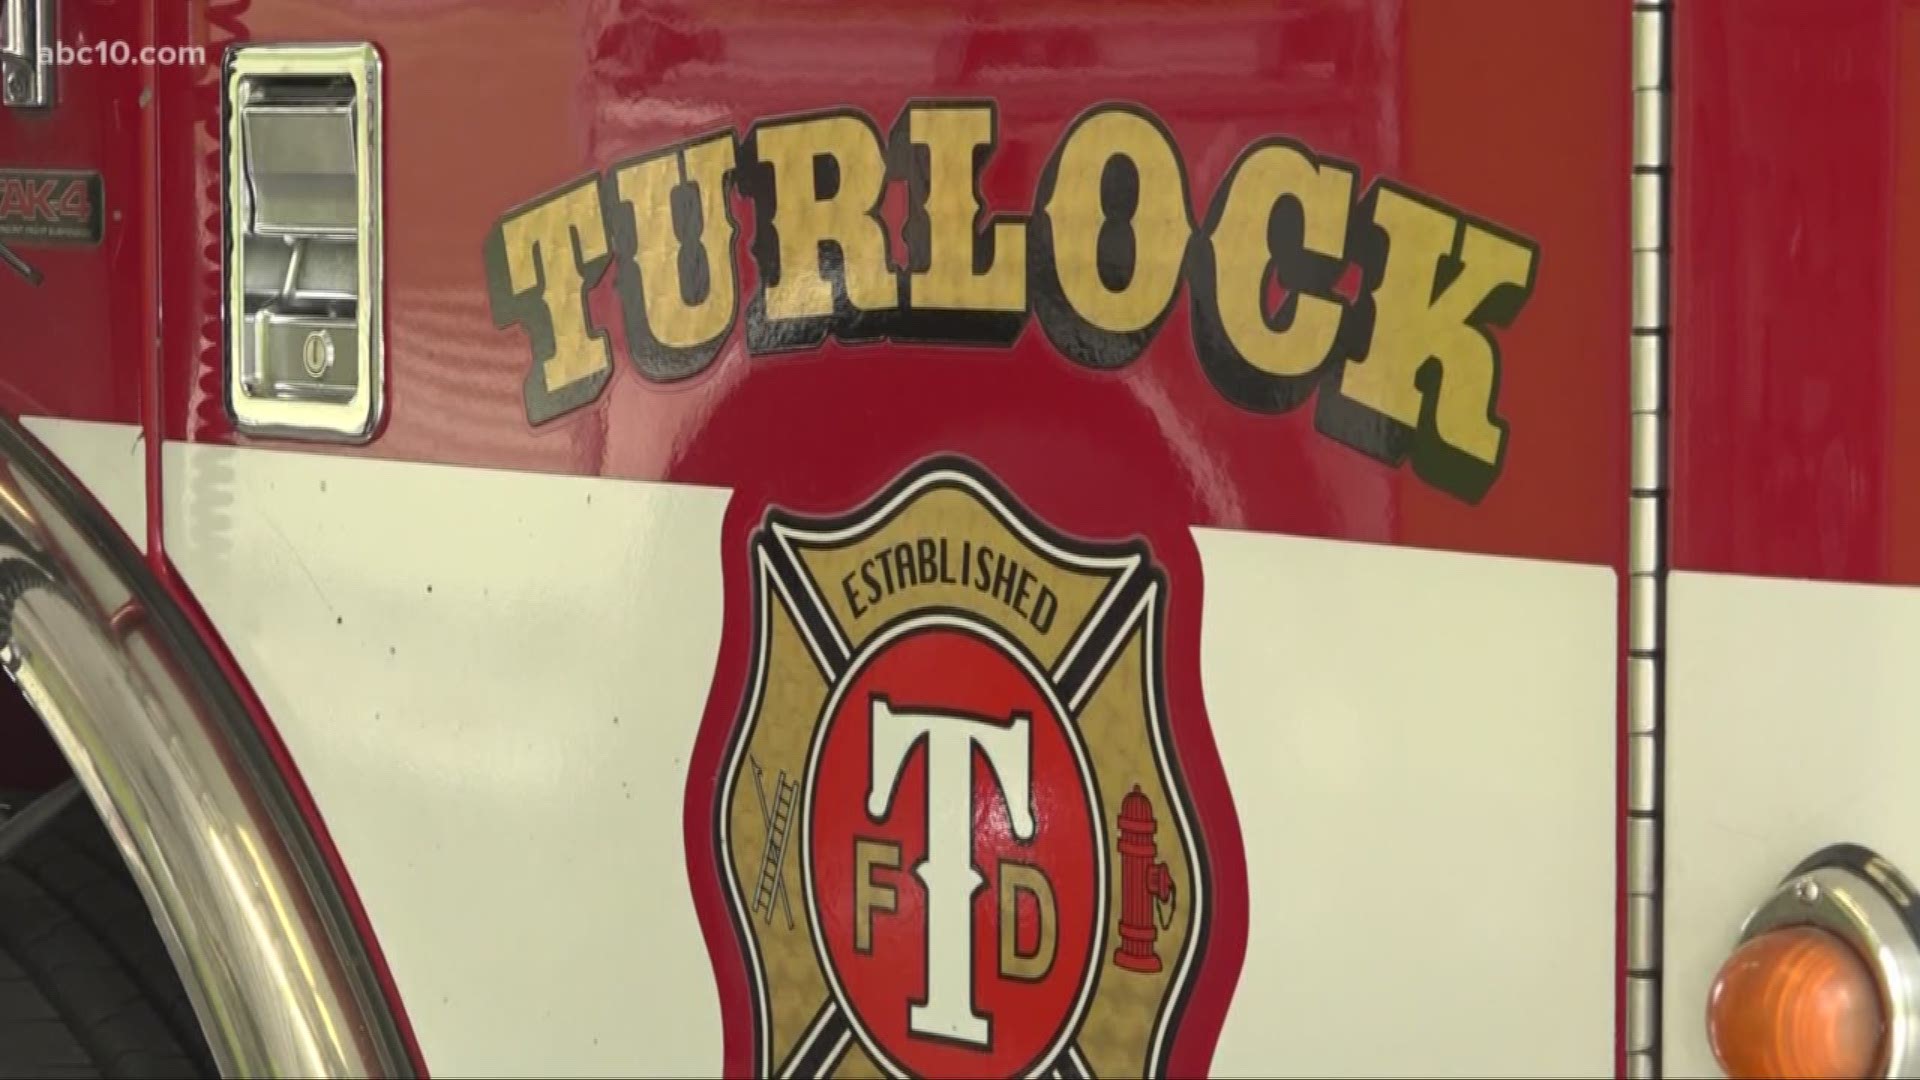 The City of Turlock's new budget cuts $750,000 in staffing from the Turlock Police Department.